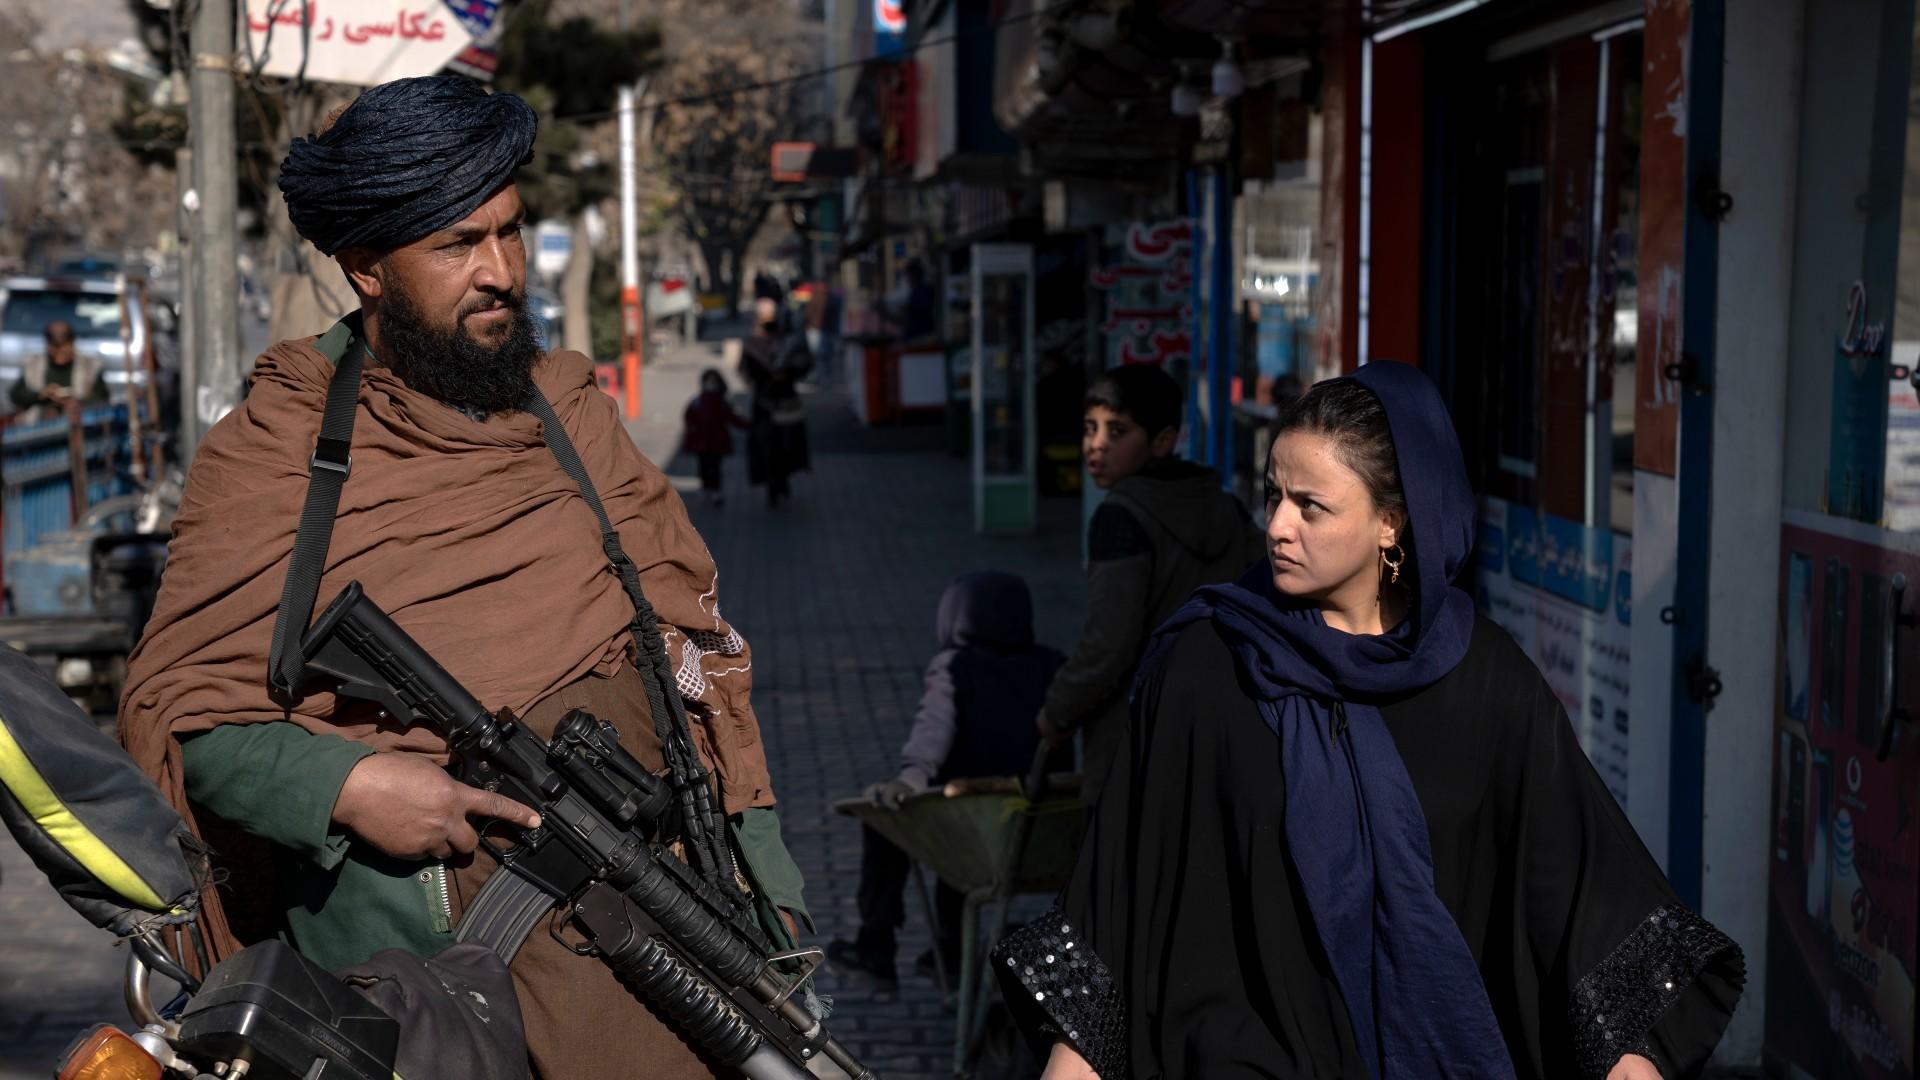 A Taliban fighter stands guard as a woman walks past in Kabul, Afghanistan, on 26 December (AP)